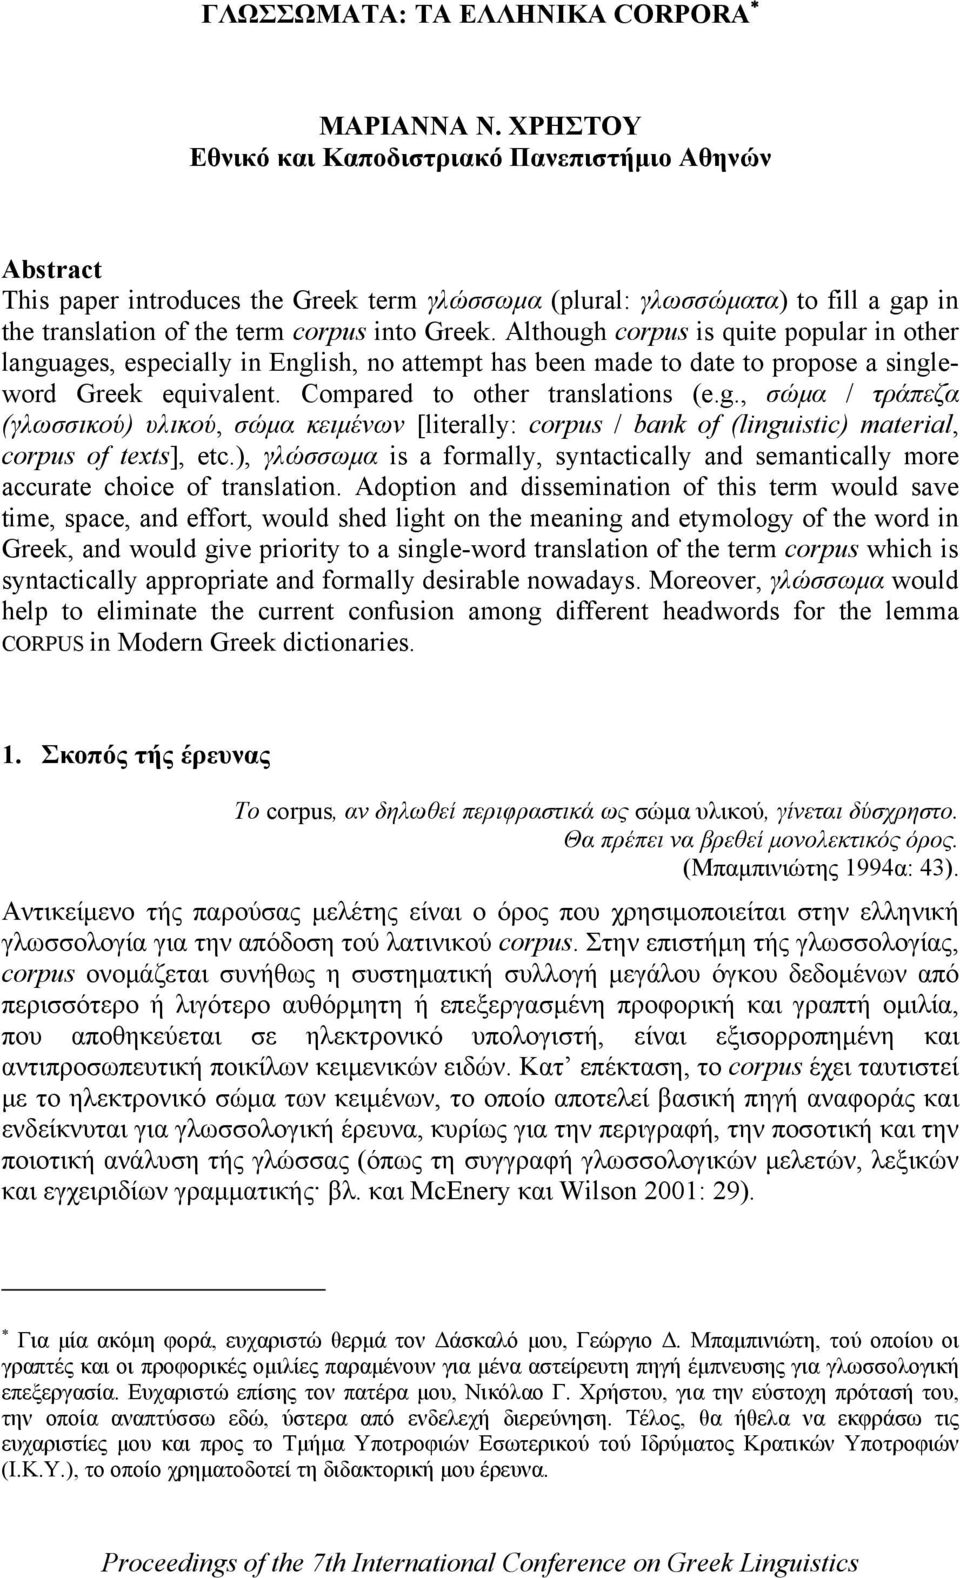 Although corpus is quite popular in other languages, especially in English, no attempt has been made to date to propose a singleword Greek equivalent. Compared to other translations (e.g., σώμα / τράπεζα (γλωσσικού) υλικού, σώμα κειμένων [literally: corpus / bank of (linguistic) material, corpus of texts], etc.